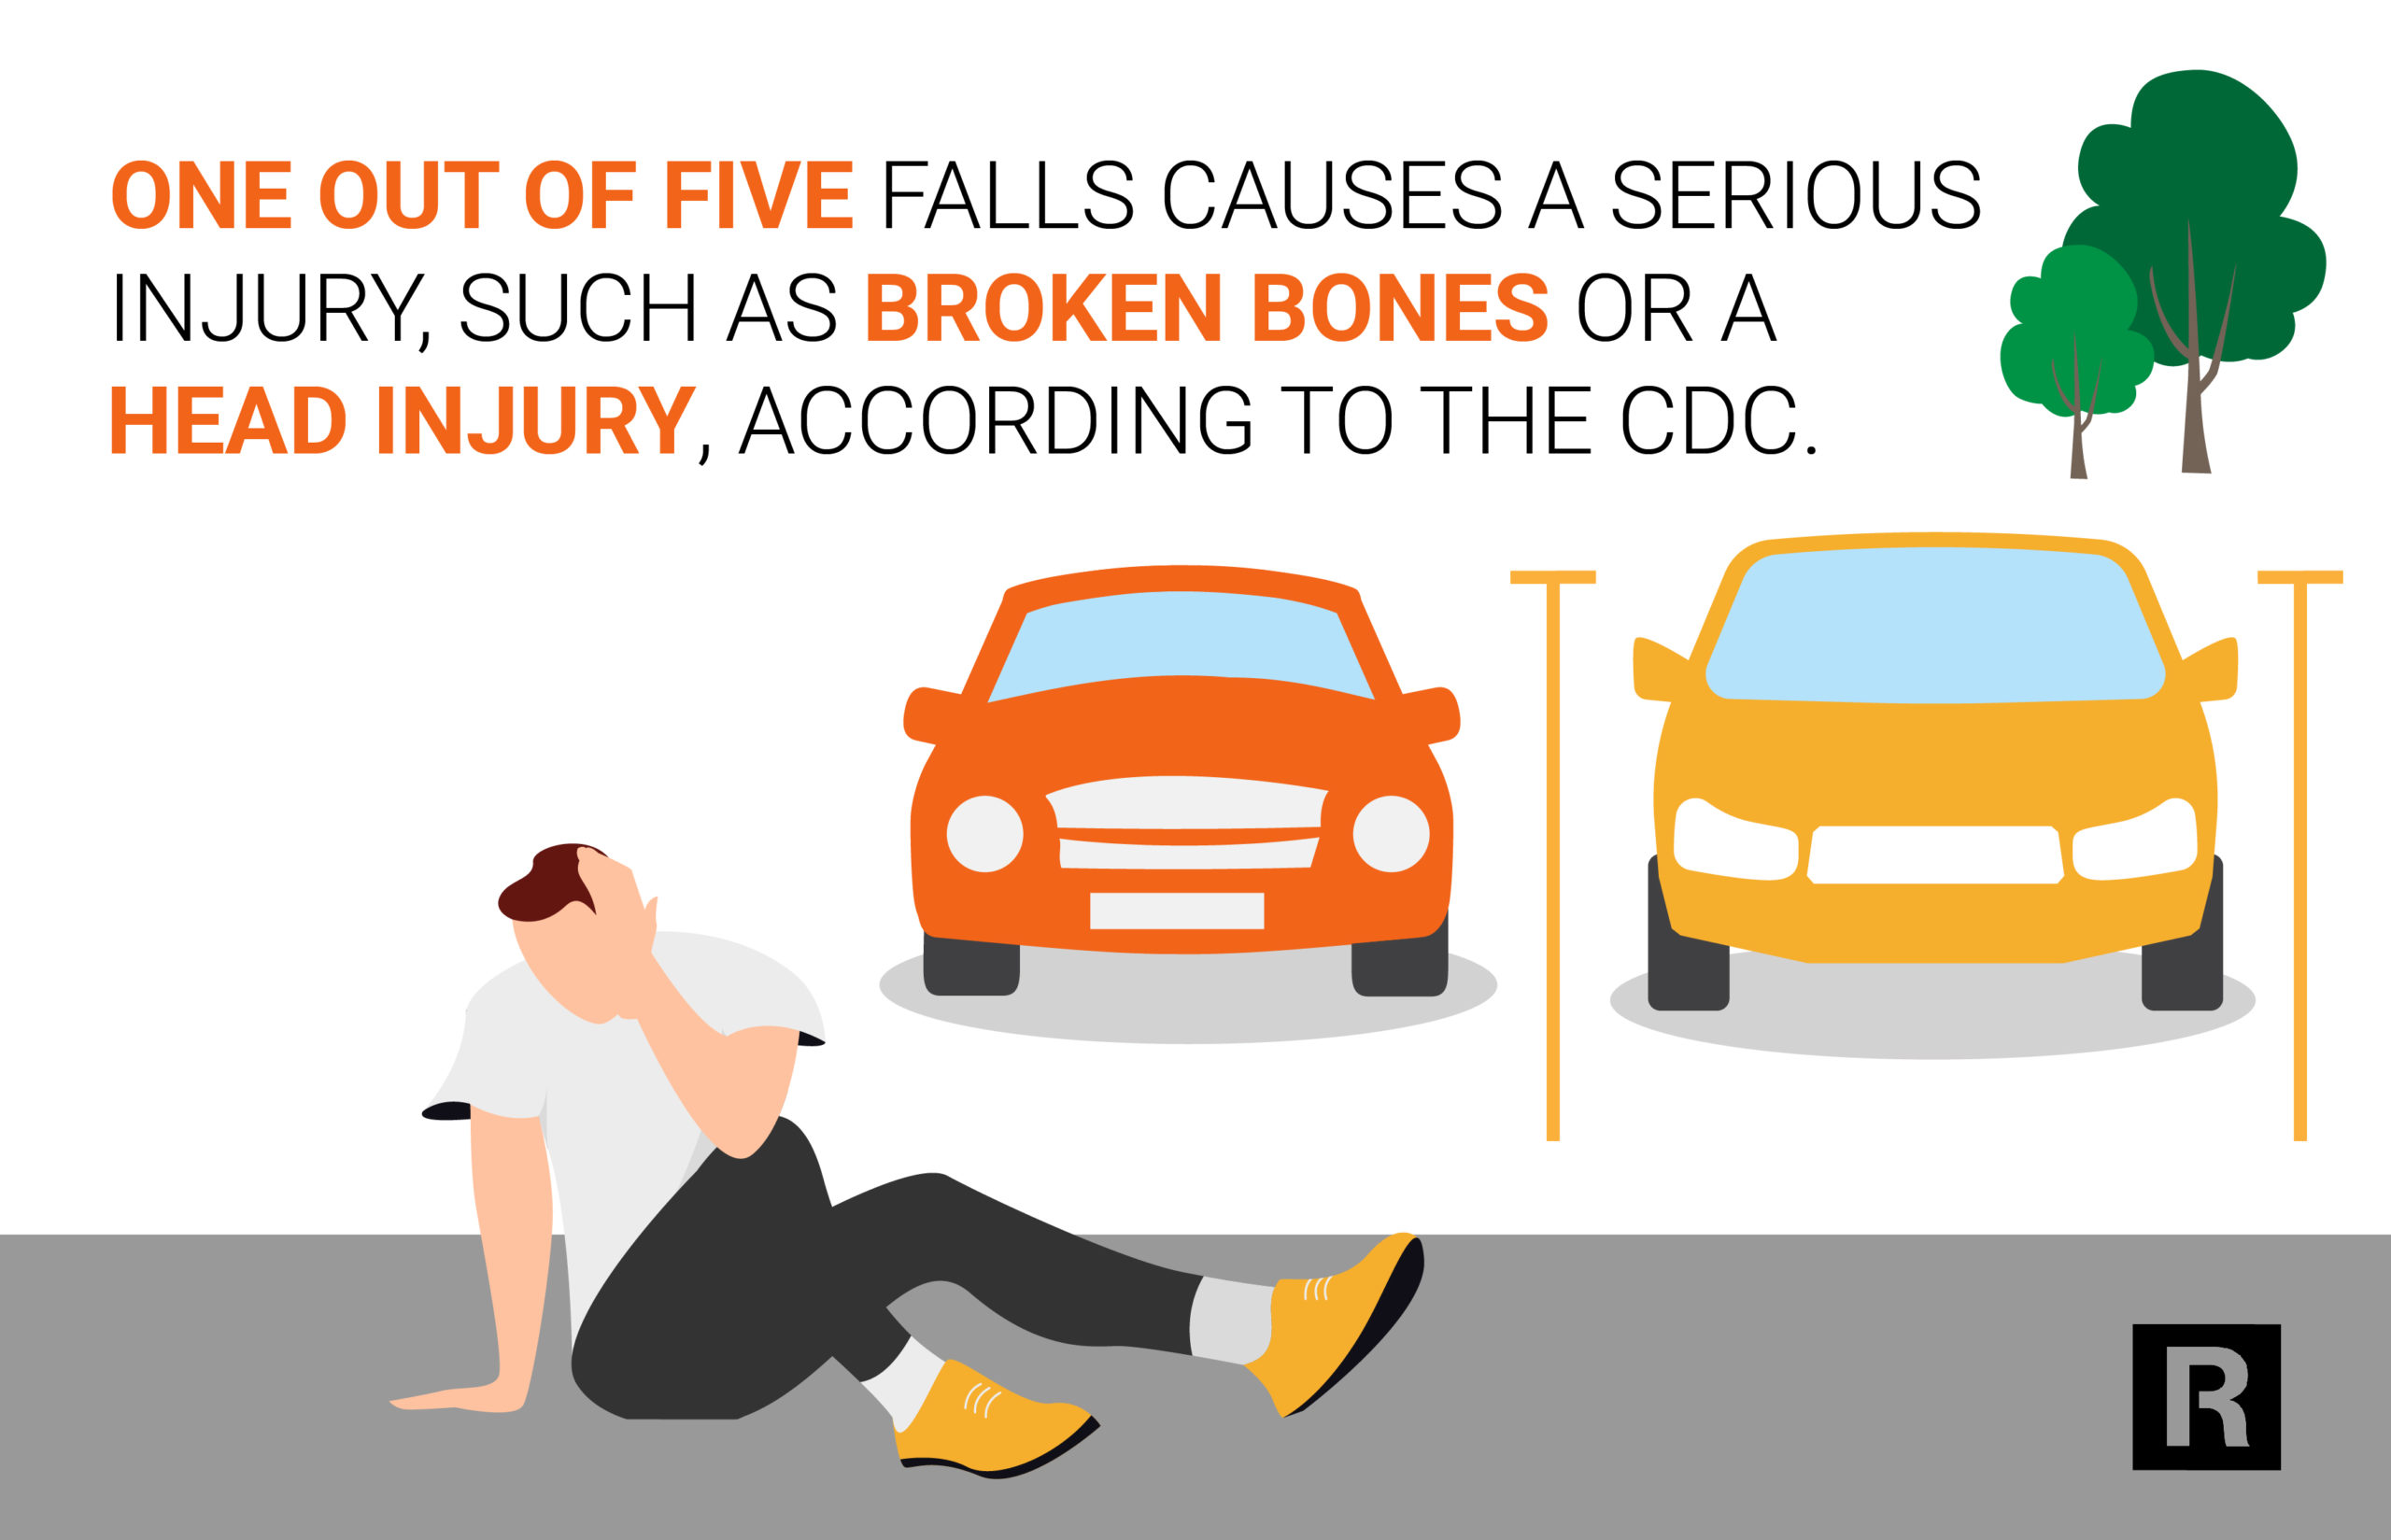 One out of five falls causes a serious injury, such as broken bones or a head injury, according to the CDC